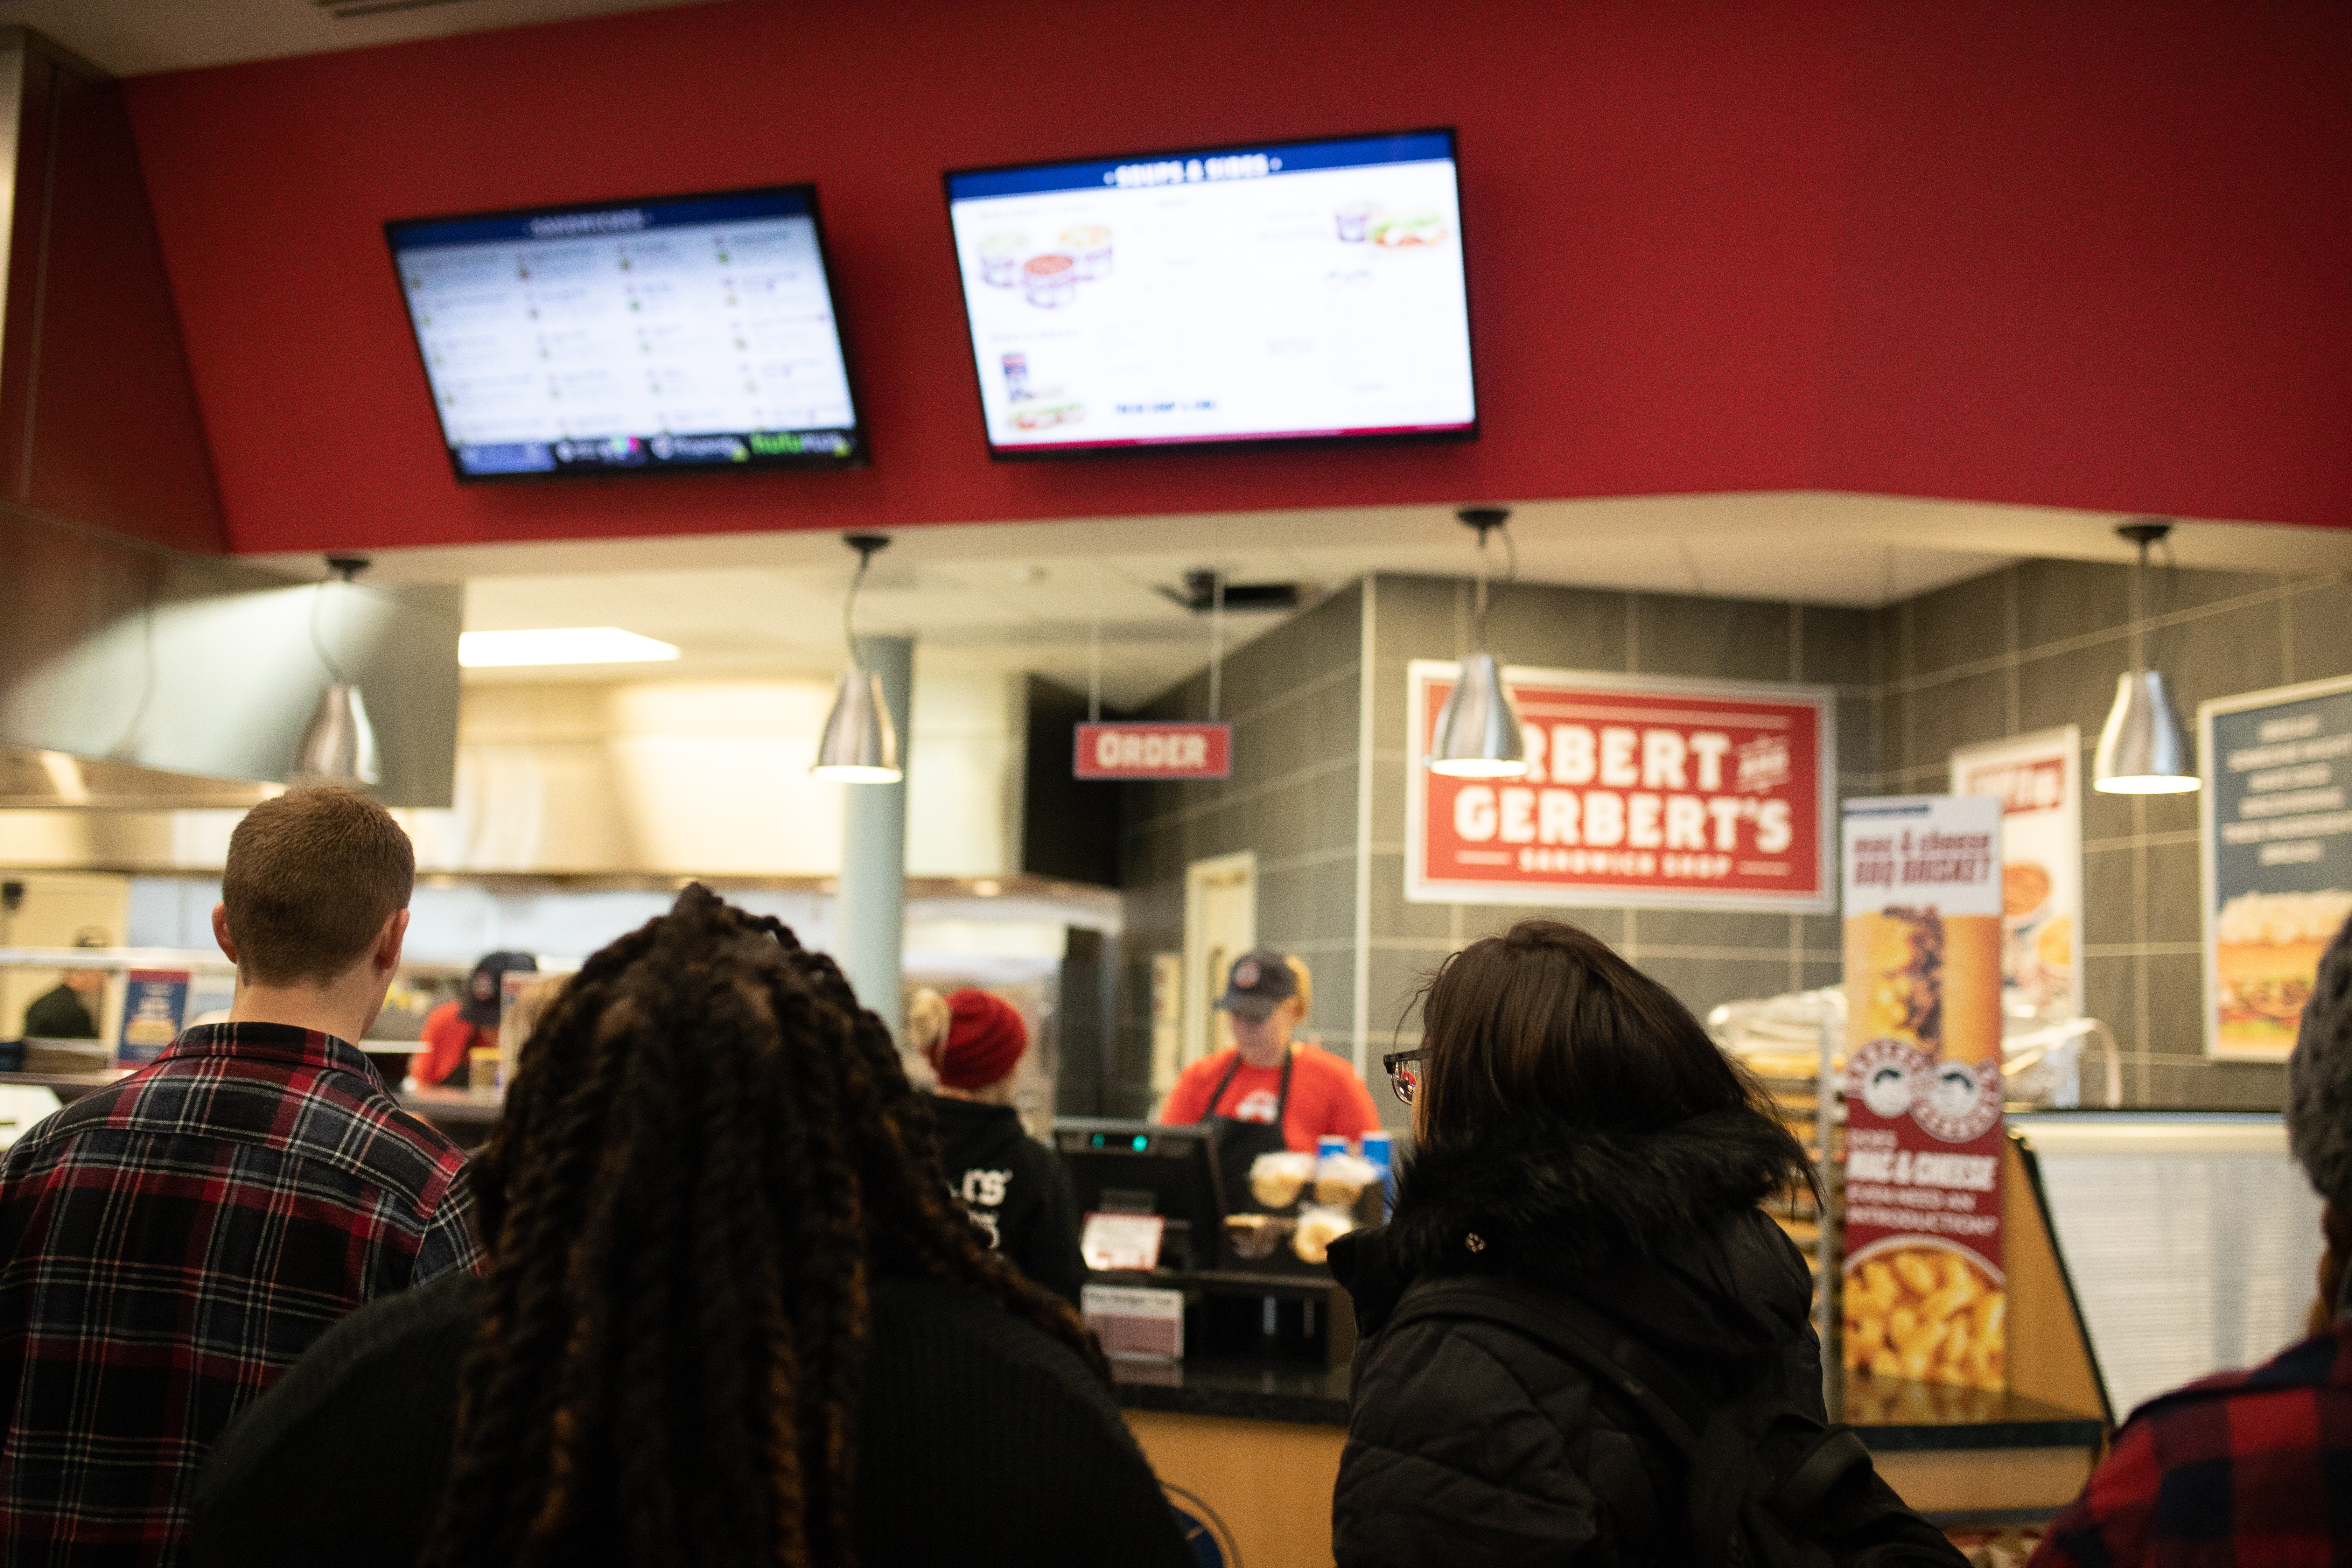 Erbert & Gerbert’s comes to campus, offers new choices